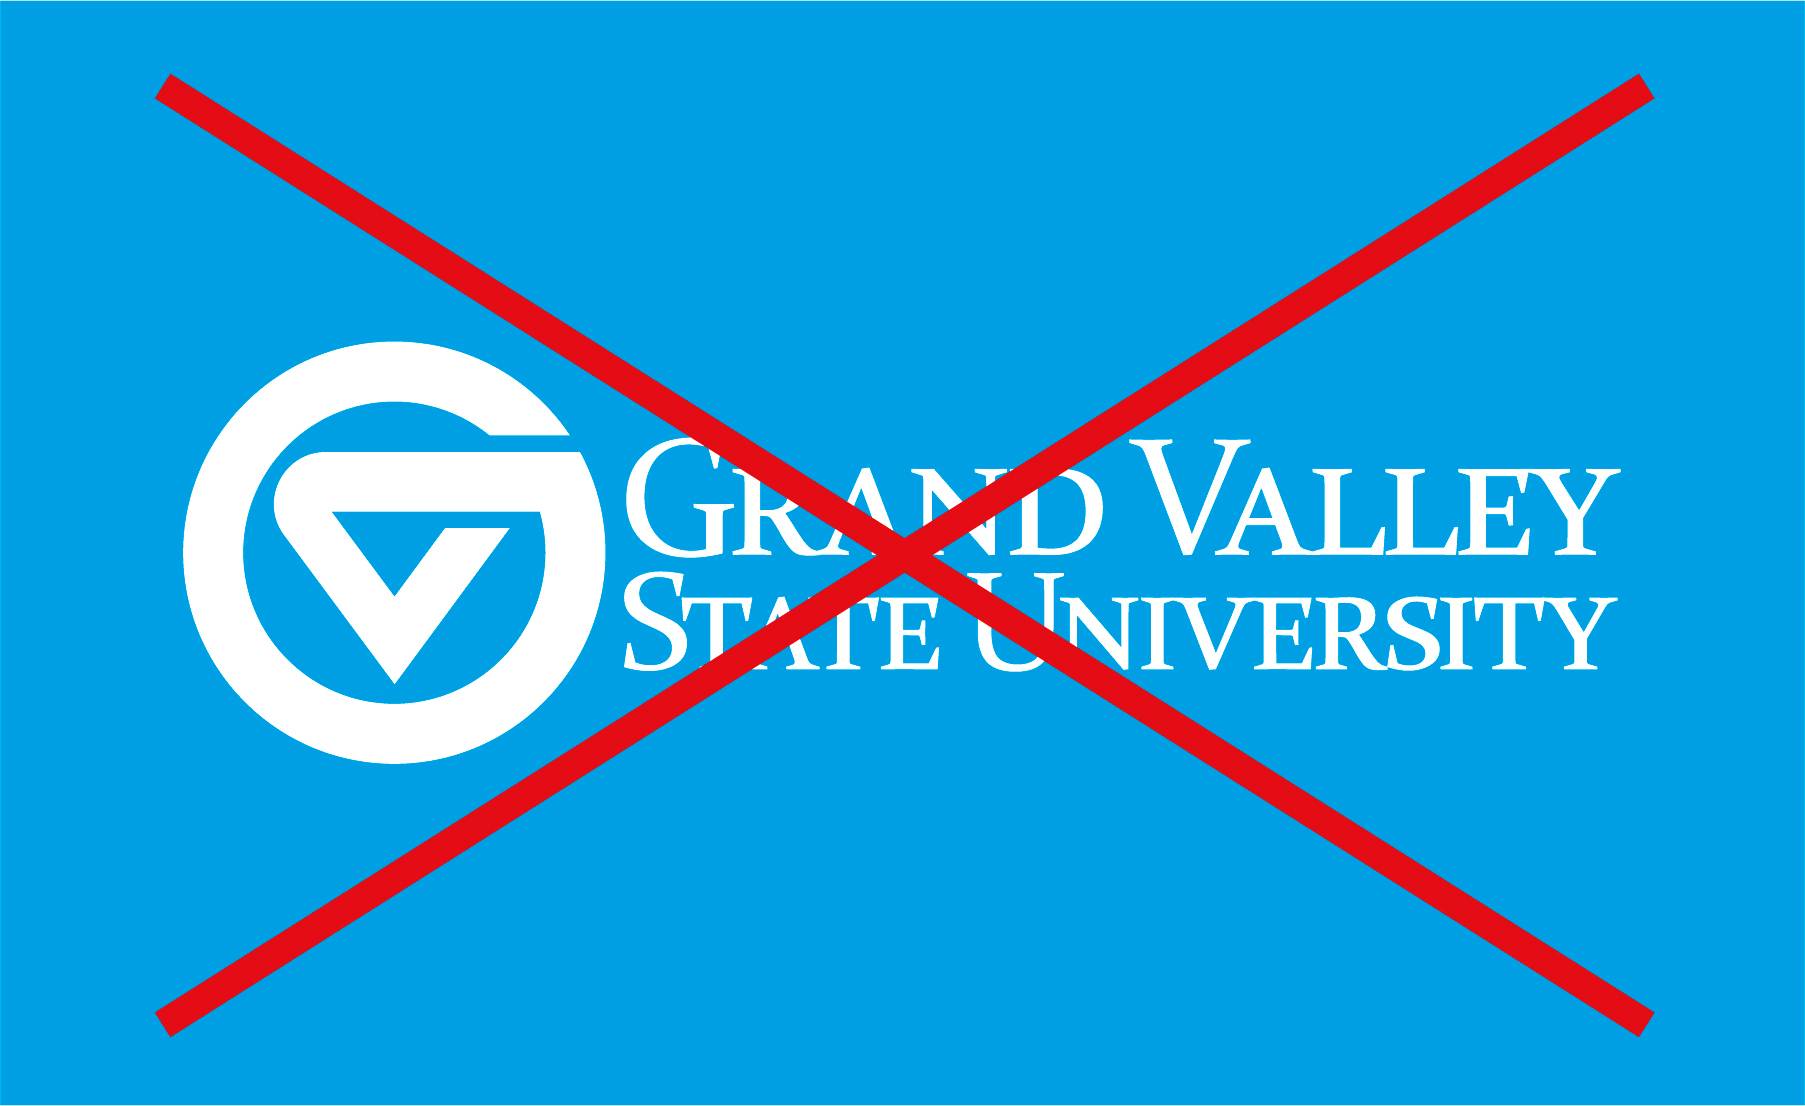 The circle-G logomark next to the words "Grand Valley State University" in a font that looks similar to the logotype artwork. A red X overlays the image.